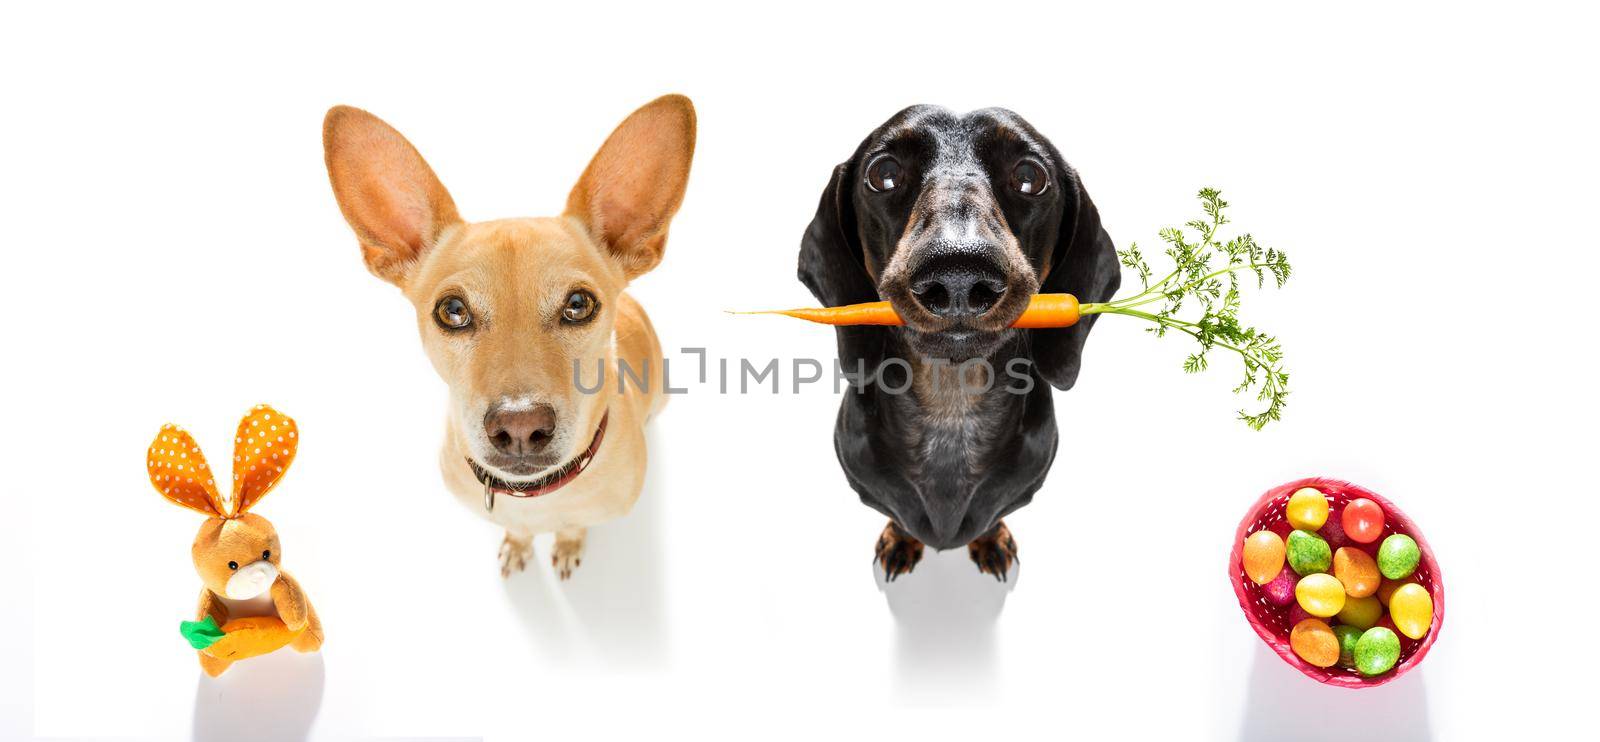 easter bunny team couple of dogs in a row with basket and eggs isolated on white background for the holiday season